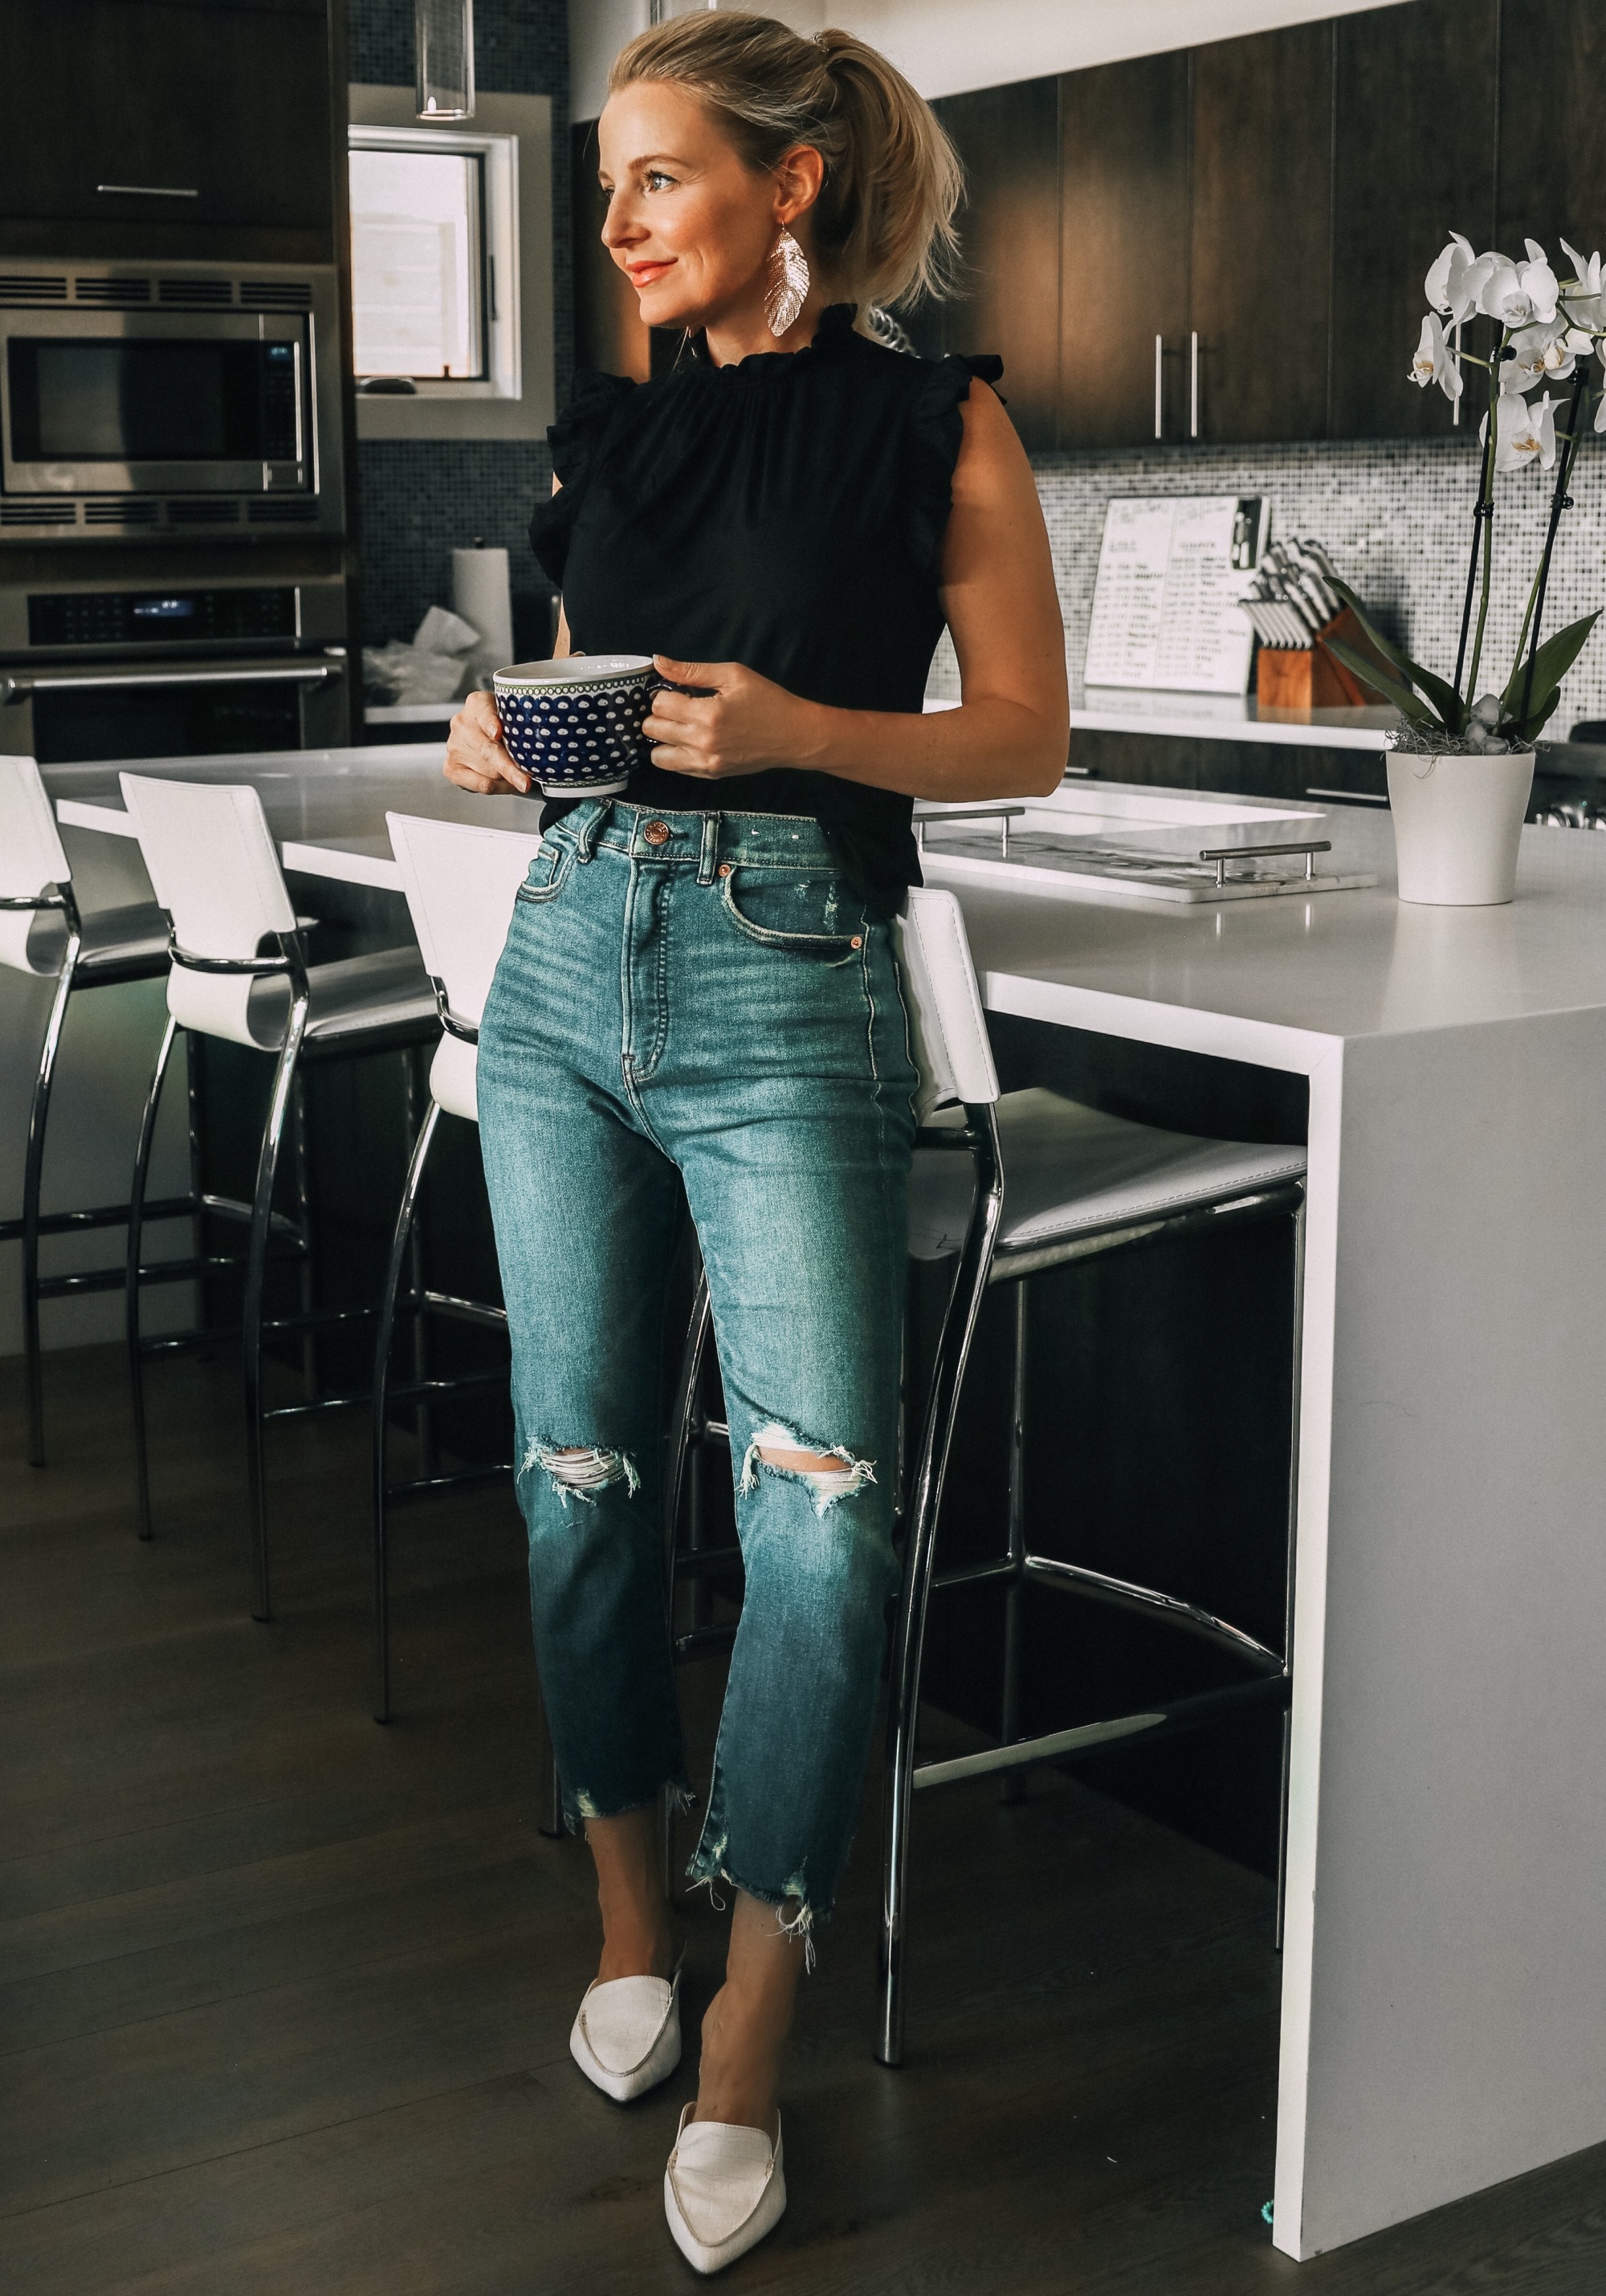 Work from home outfits that are affordable from Express featuring high rise distressed mom jeans, white loafers, black mock neck ruffle cotton top and lightweight leaf earrings